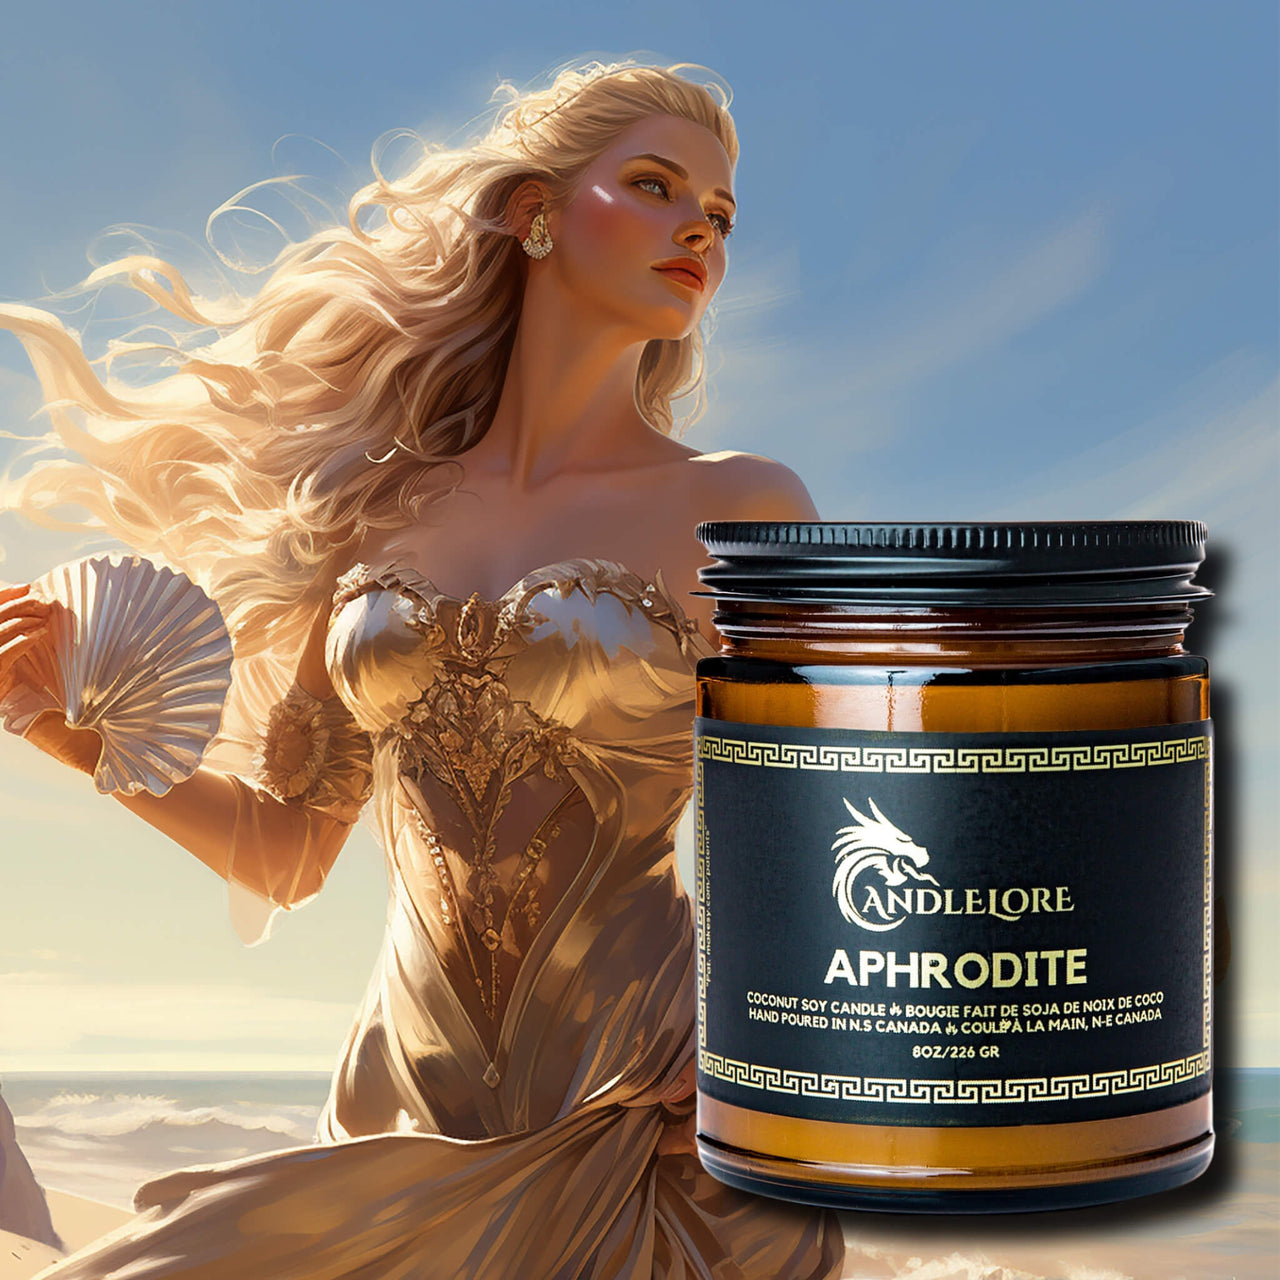 Aphrodite on a beach with her candle to her right hand side